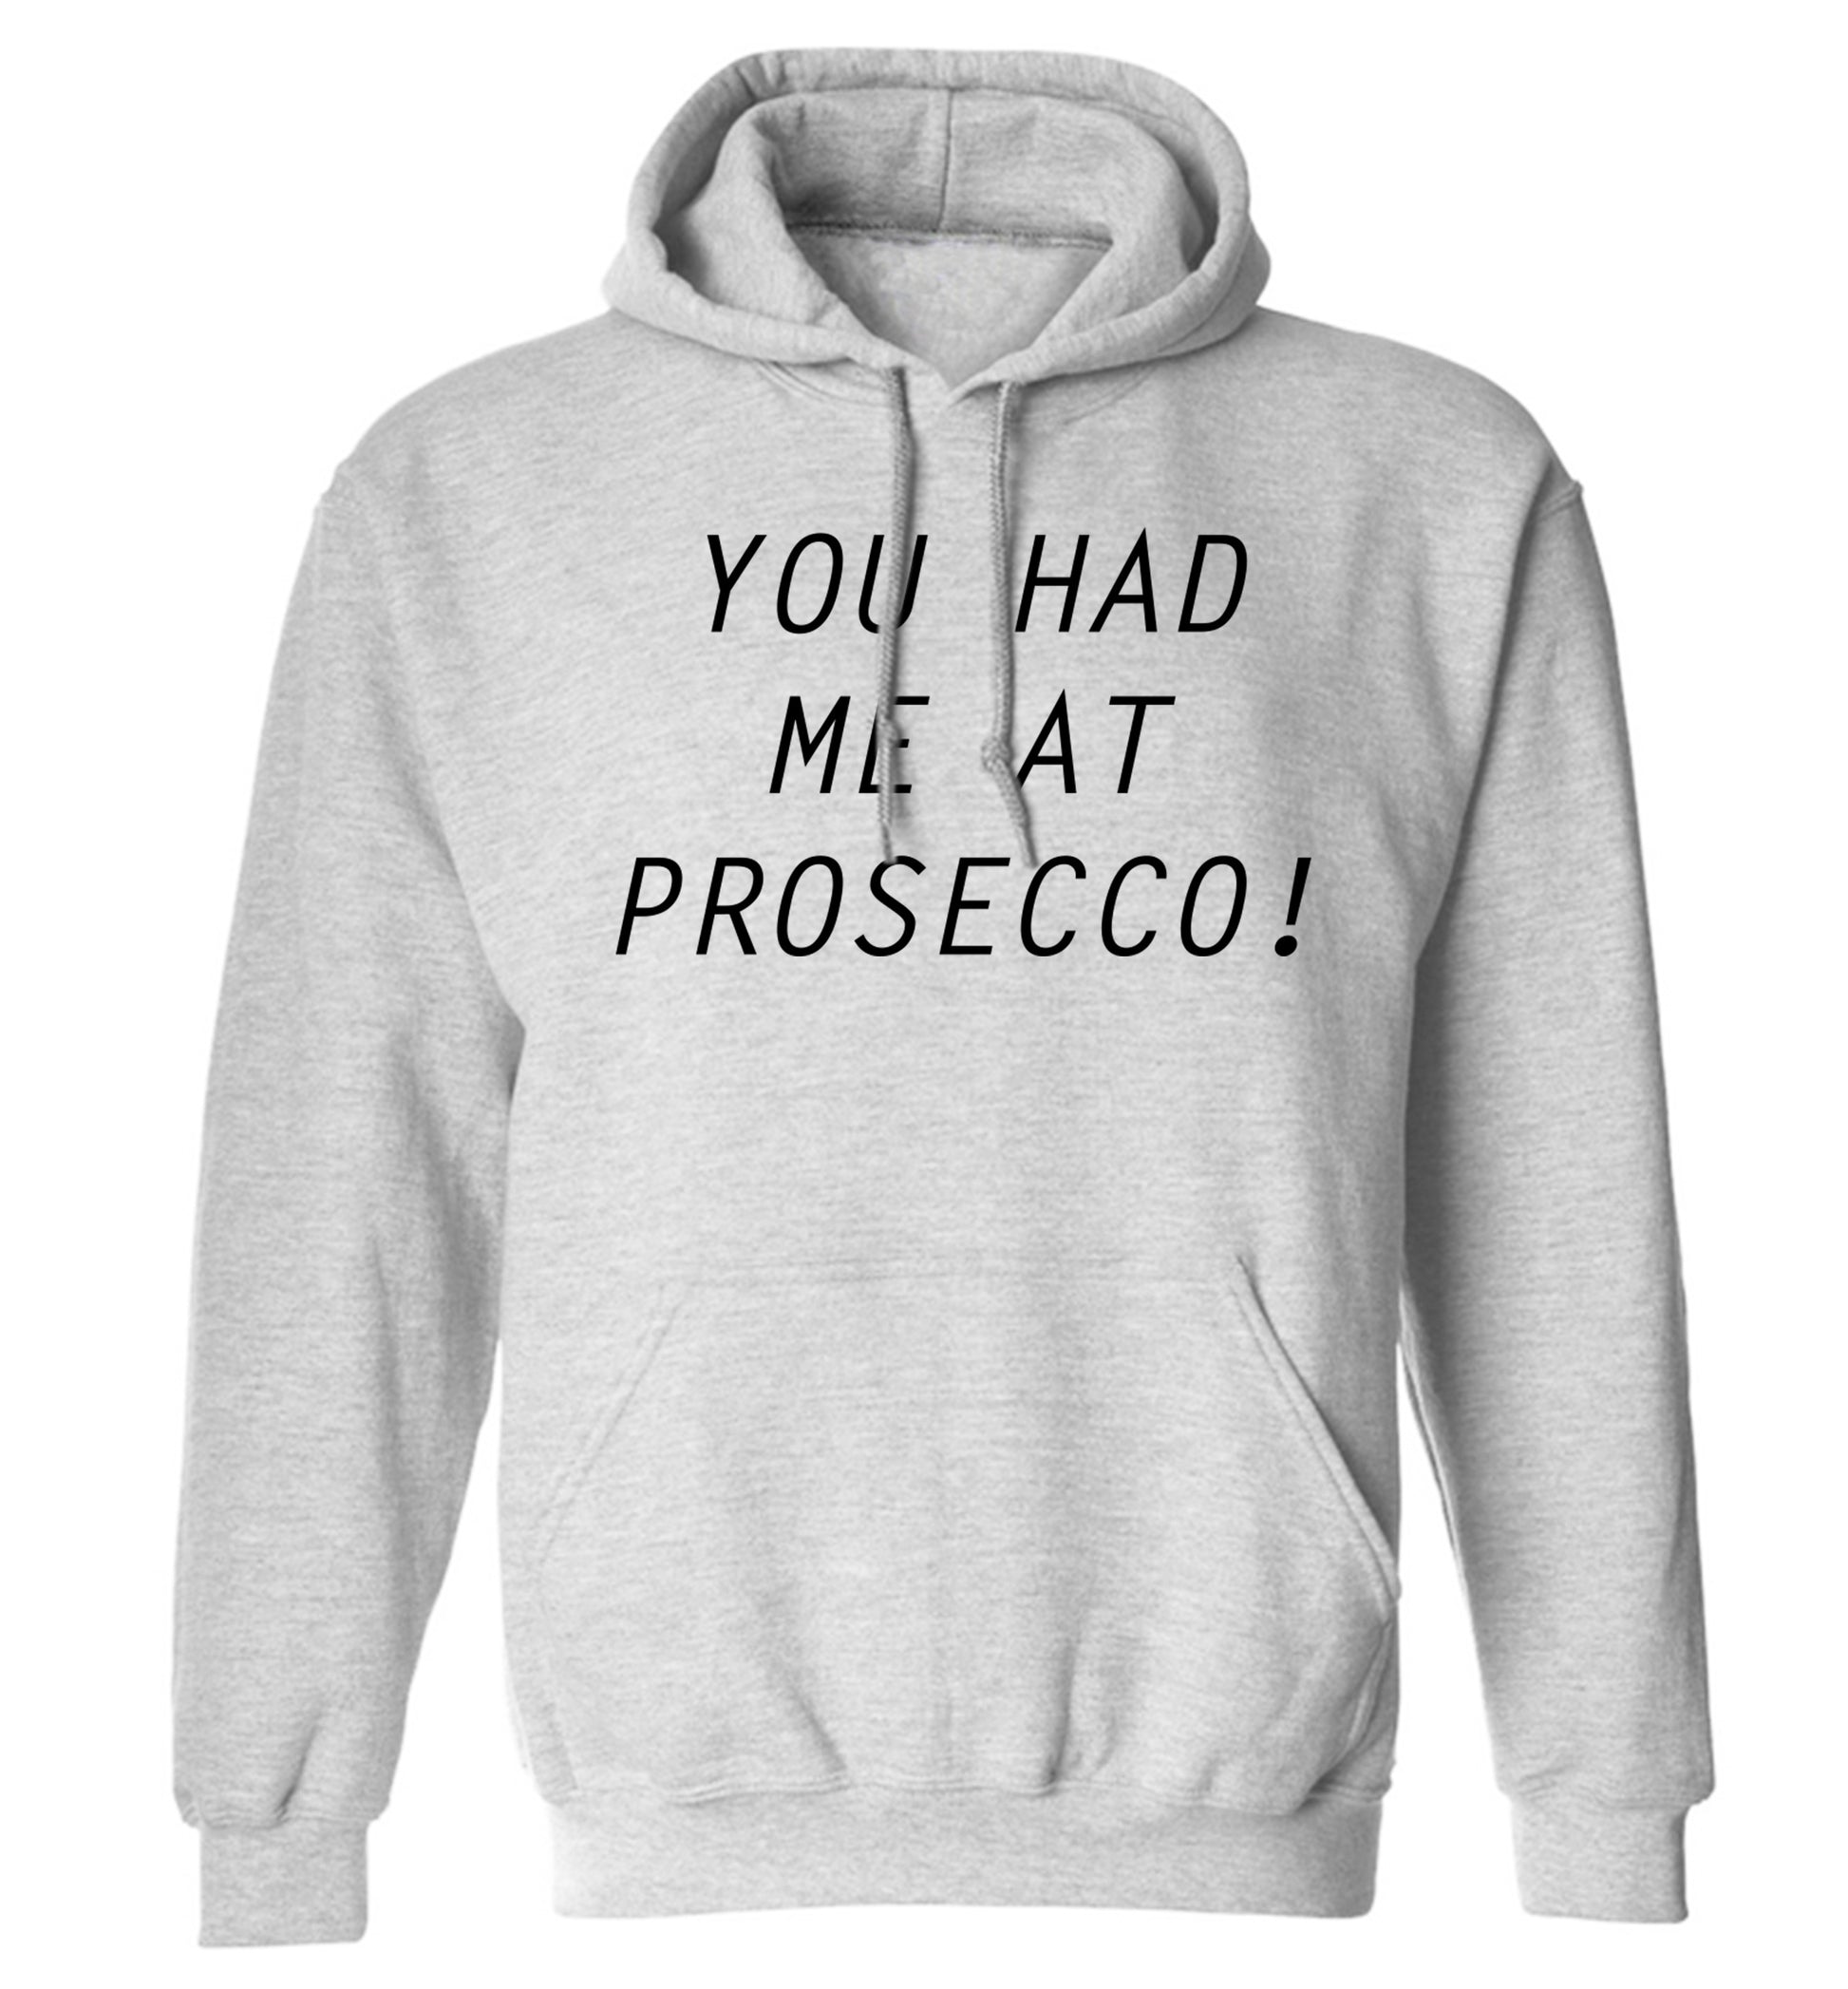 You had me at prosecco adults unisex grey hoodie 2XL